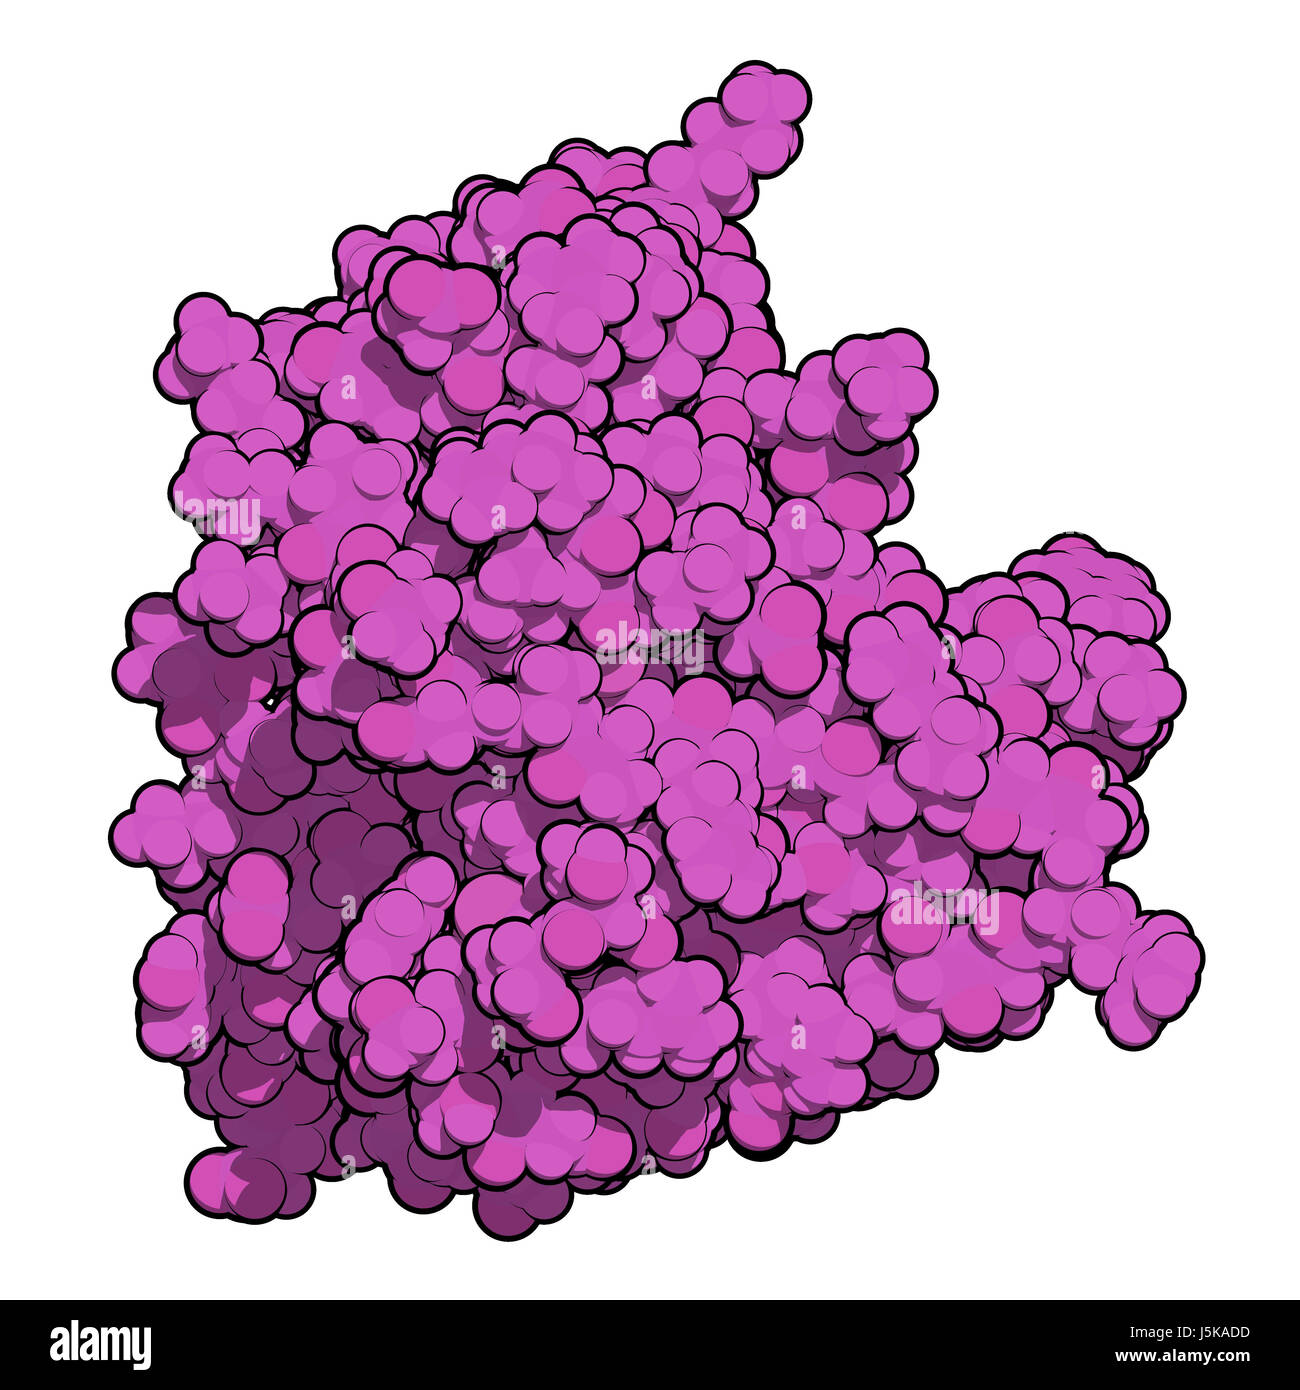 Thaumatin sweetener protein. Isolated from katemfe fruit. 3D rendering based on protein data bank entry 5lh7. Atoms shown as color-coded spheres. Stock Photo